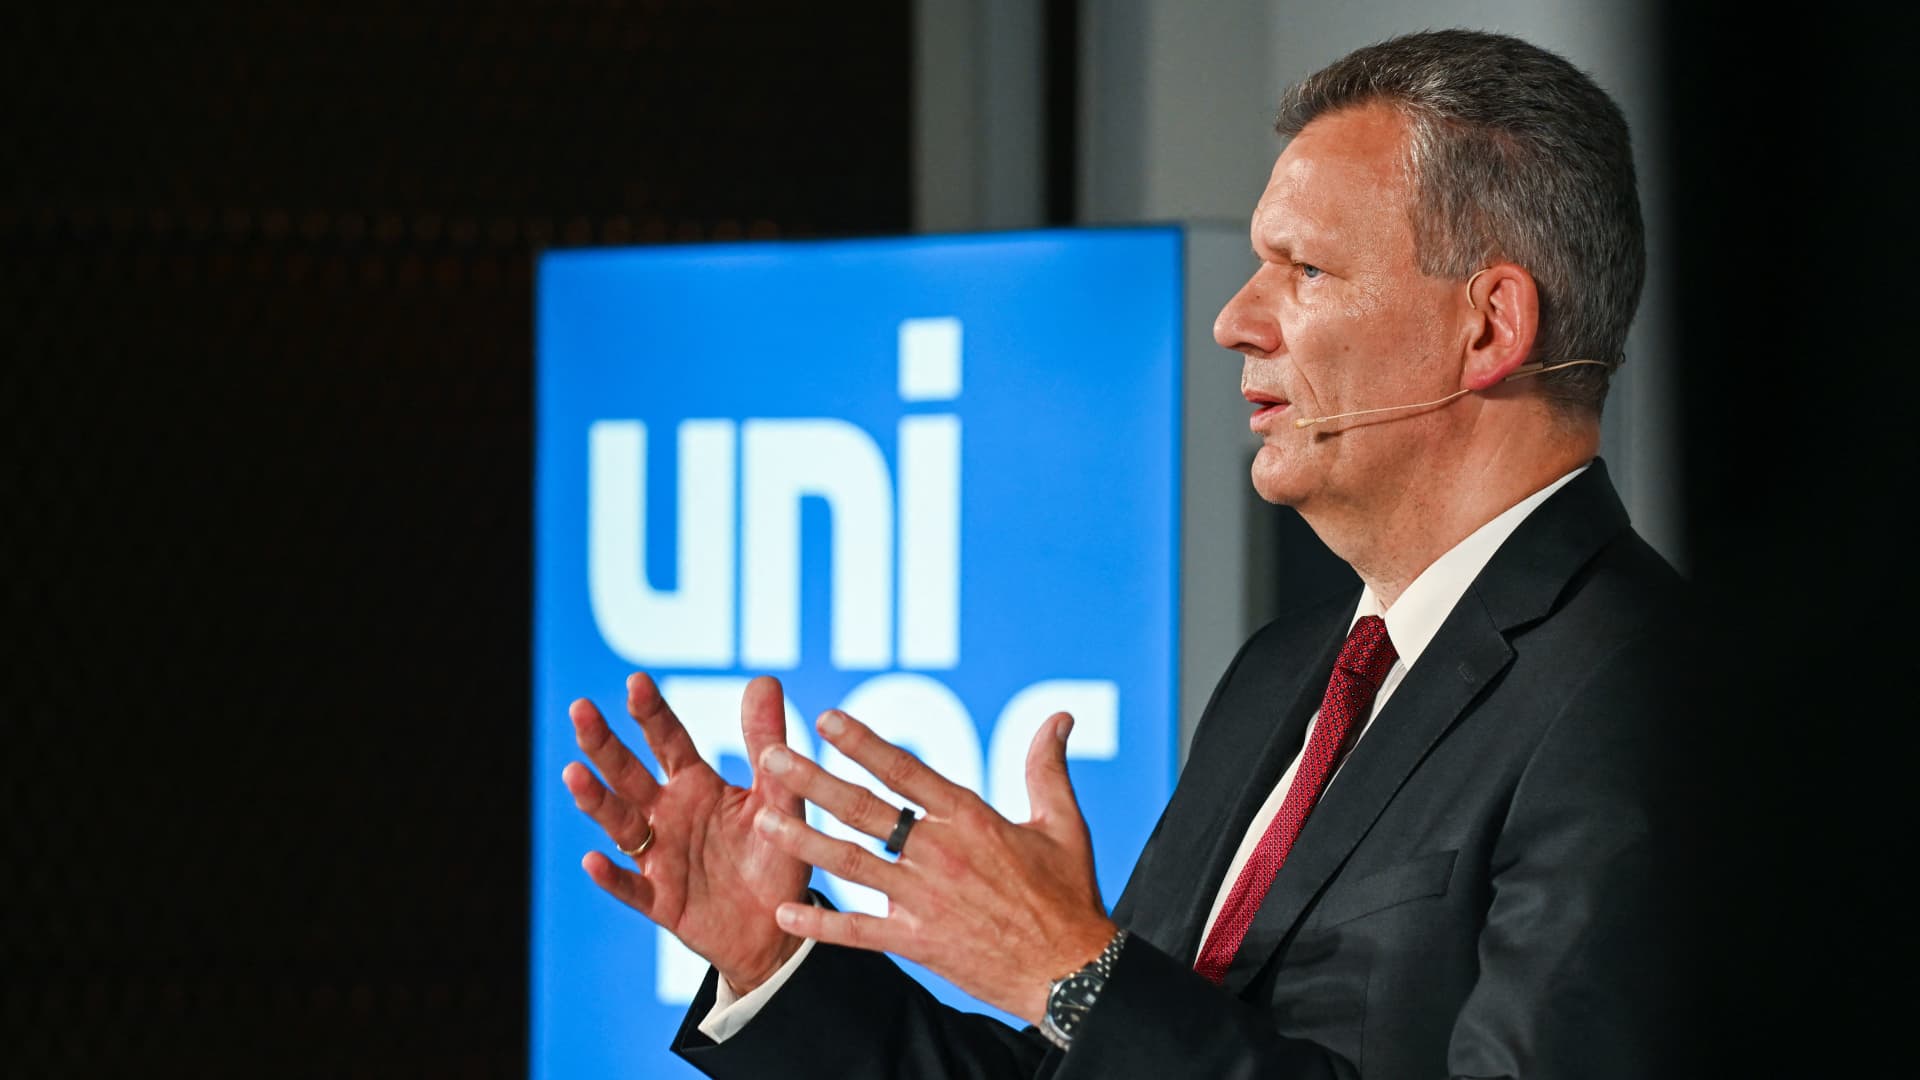 Uniper CEO Klaus-Dieter Maubach addresses a press conference about the government's rescue plan at the company's headquarters in Duesseldorf, Germany on July 8, 2022.